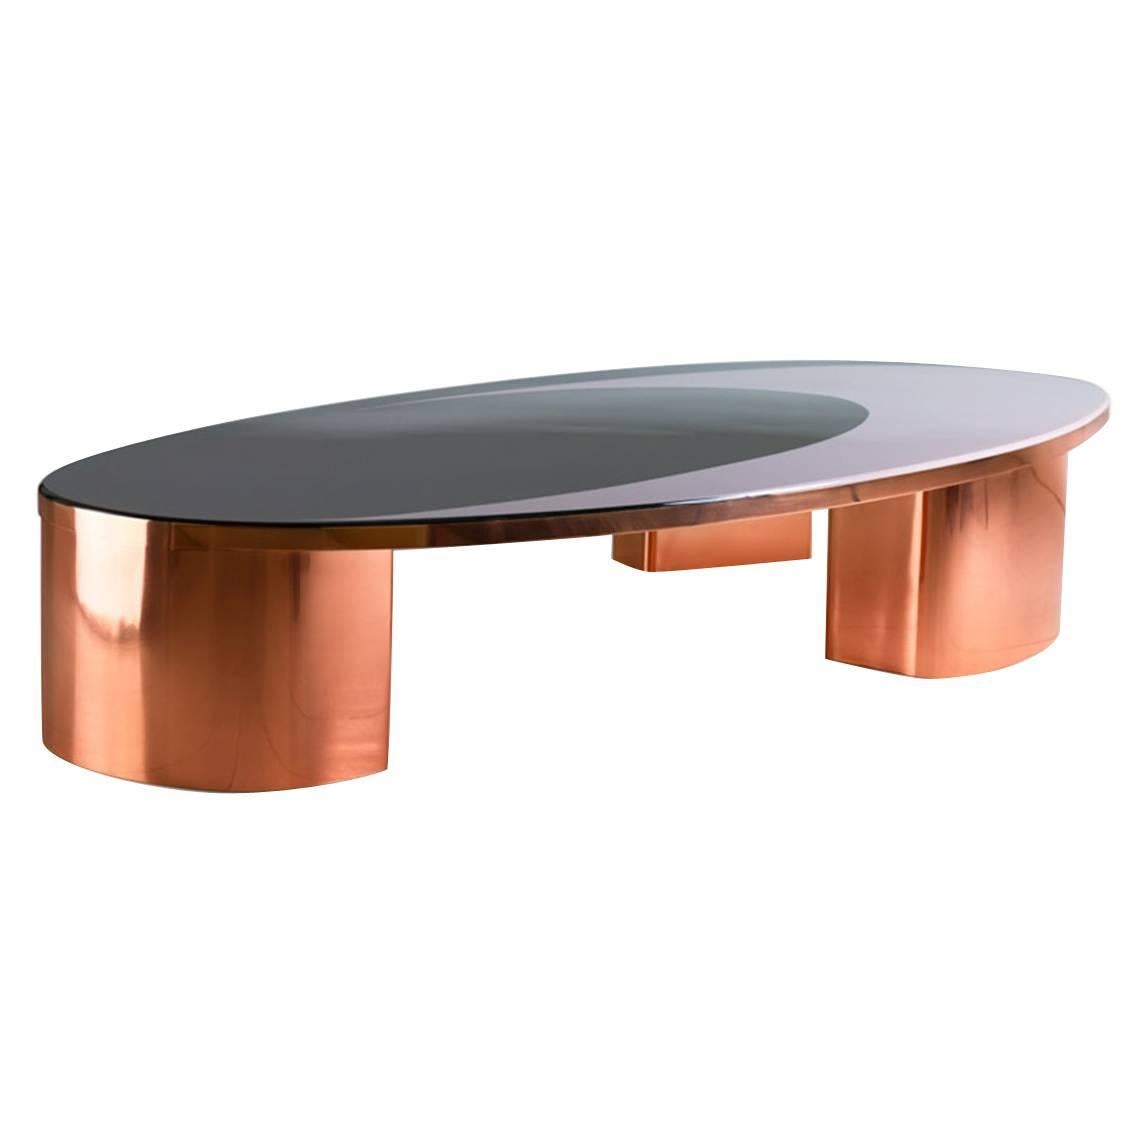 21st Century European Copper and Resin Inlay Oval Shaped Coffee Table